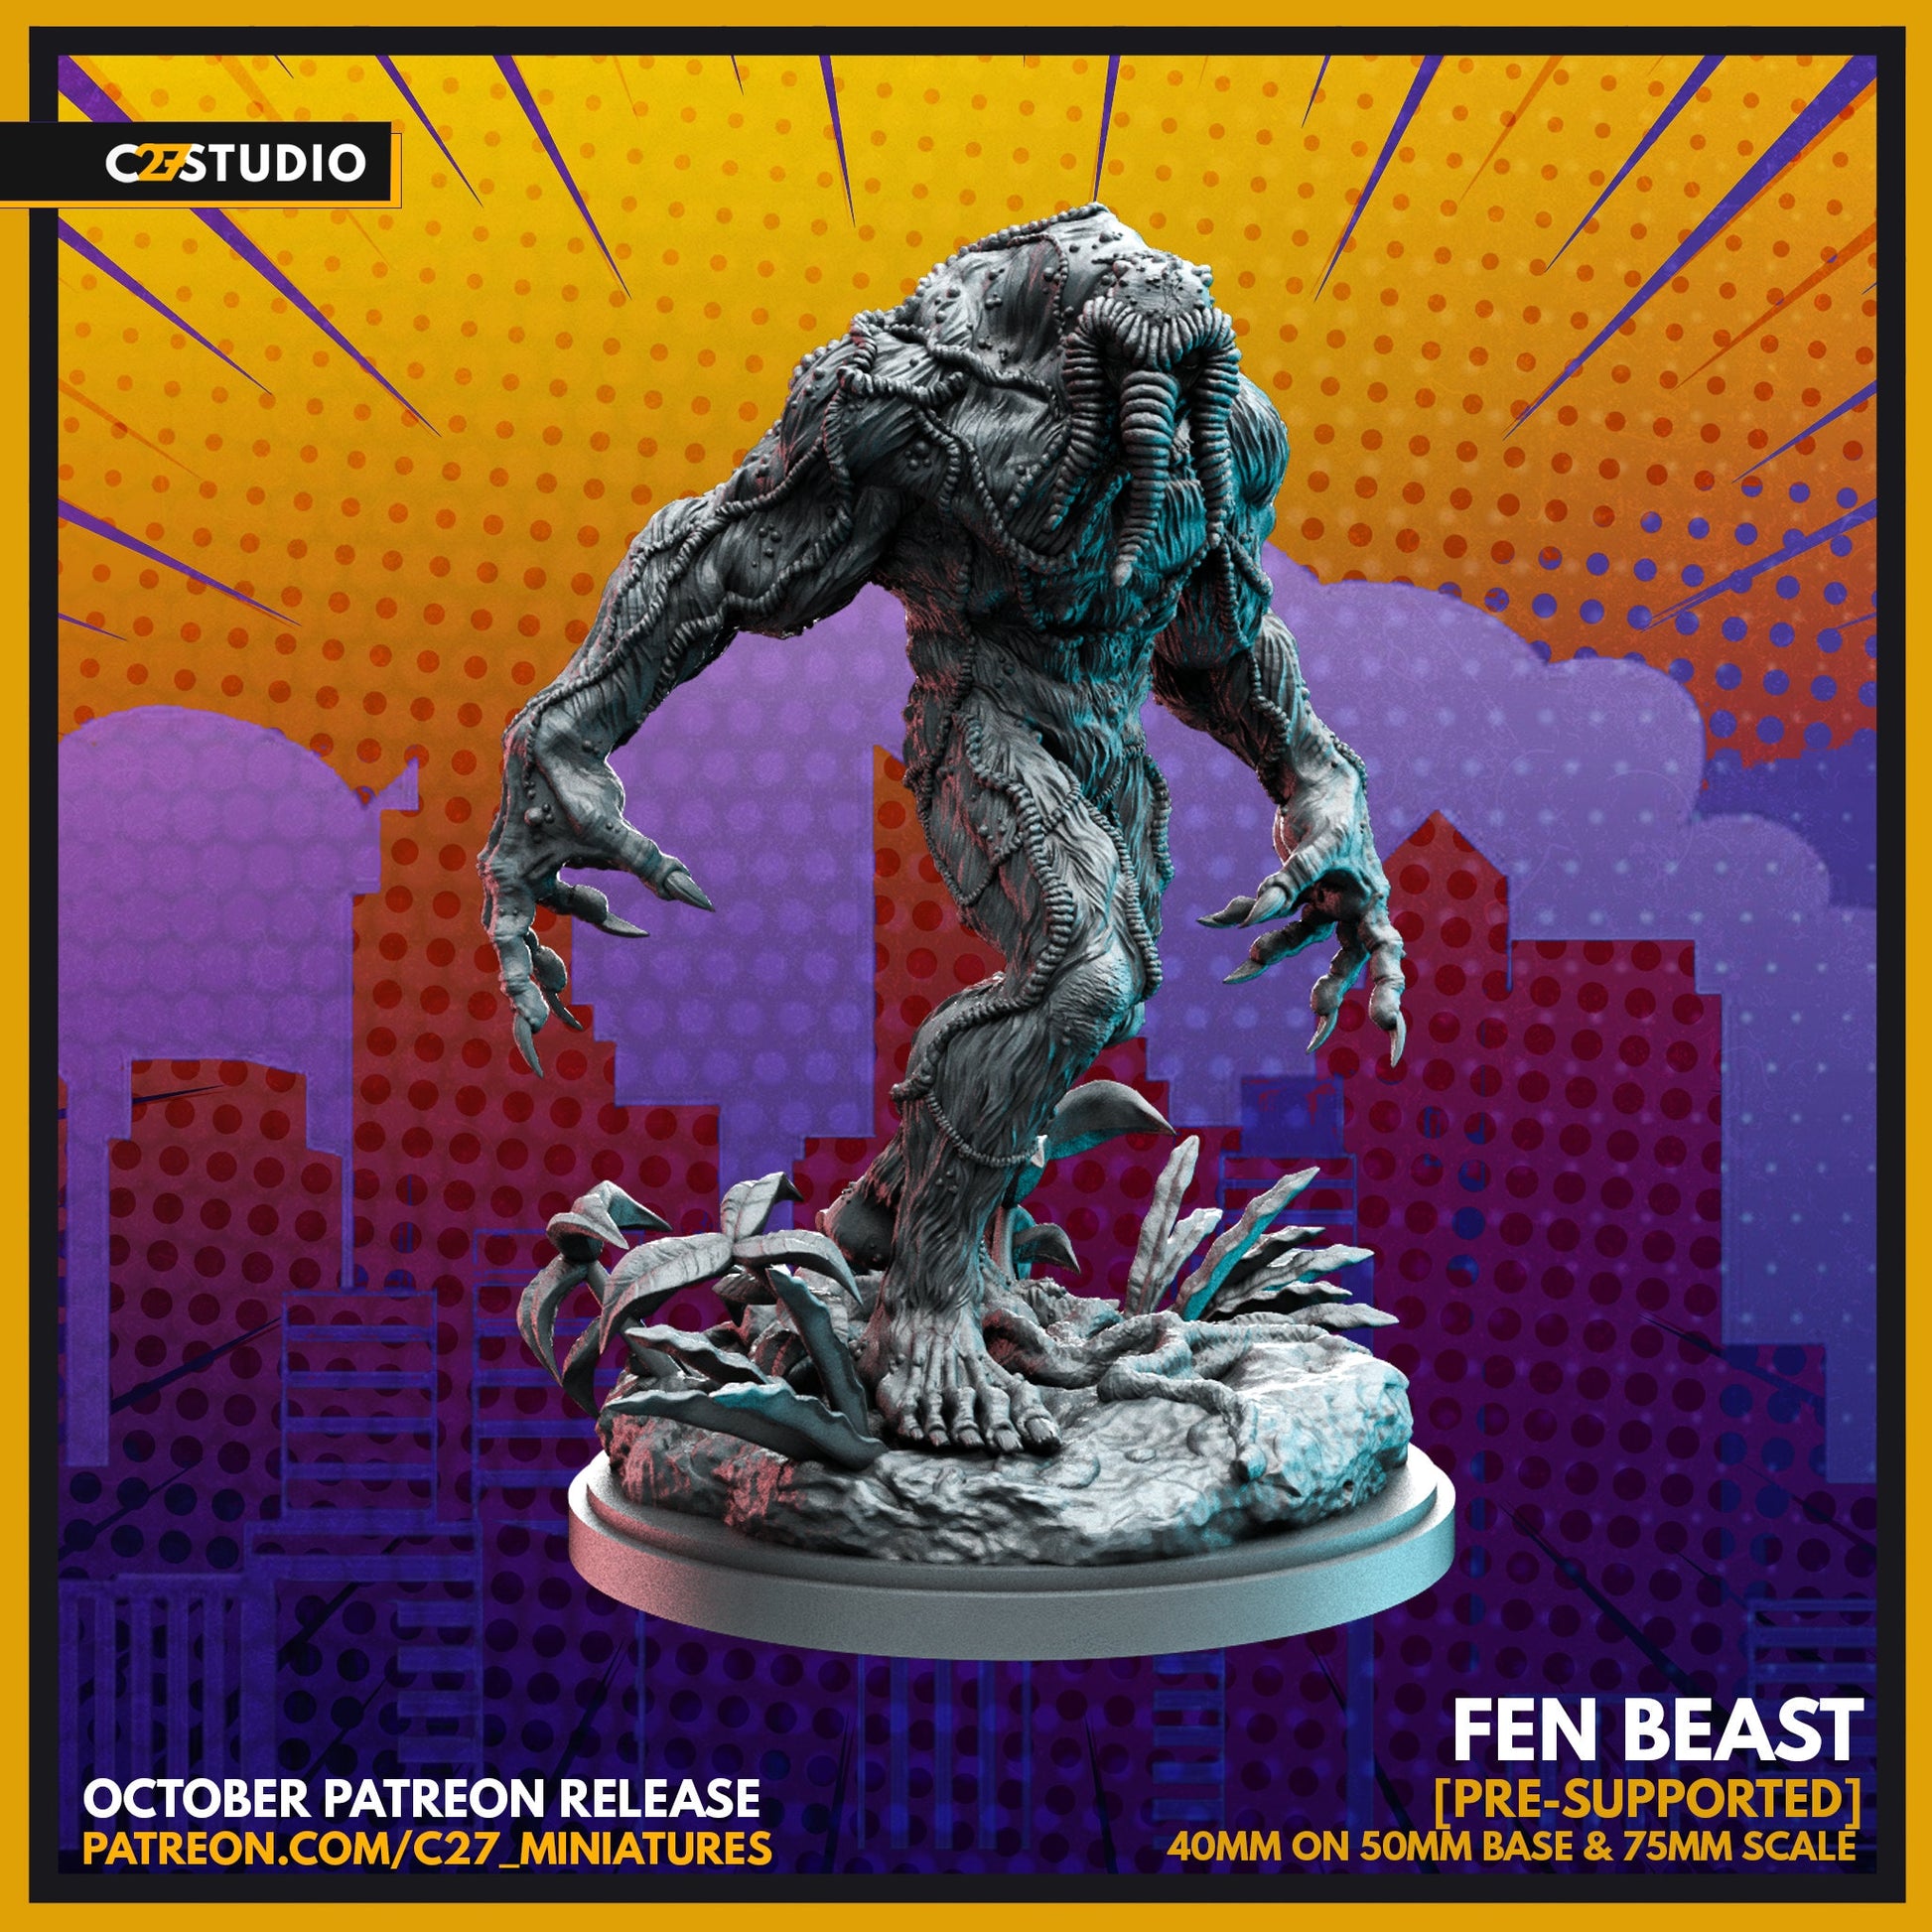 Man Thing / Fen Beast 40mm miniature (sculpted by C27 collectibles) (Crisis Protocol Proxy/Alternative)